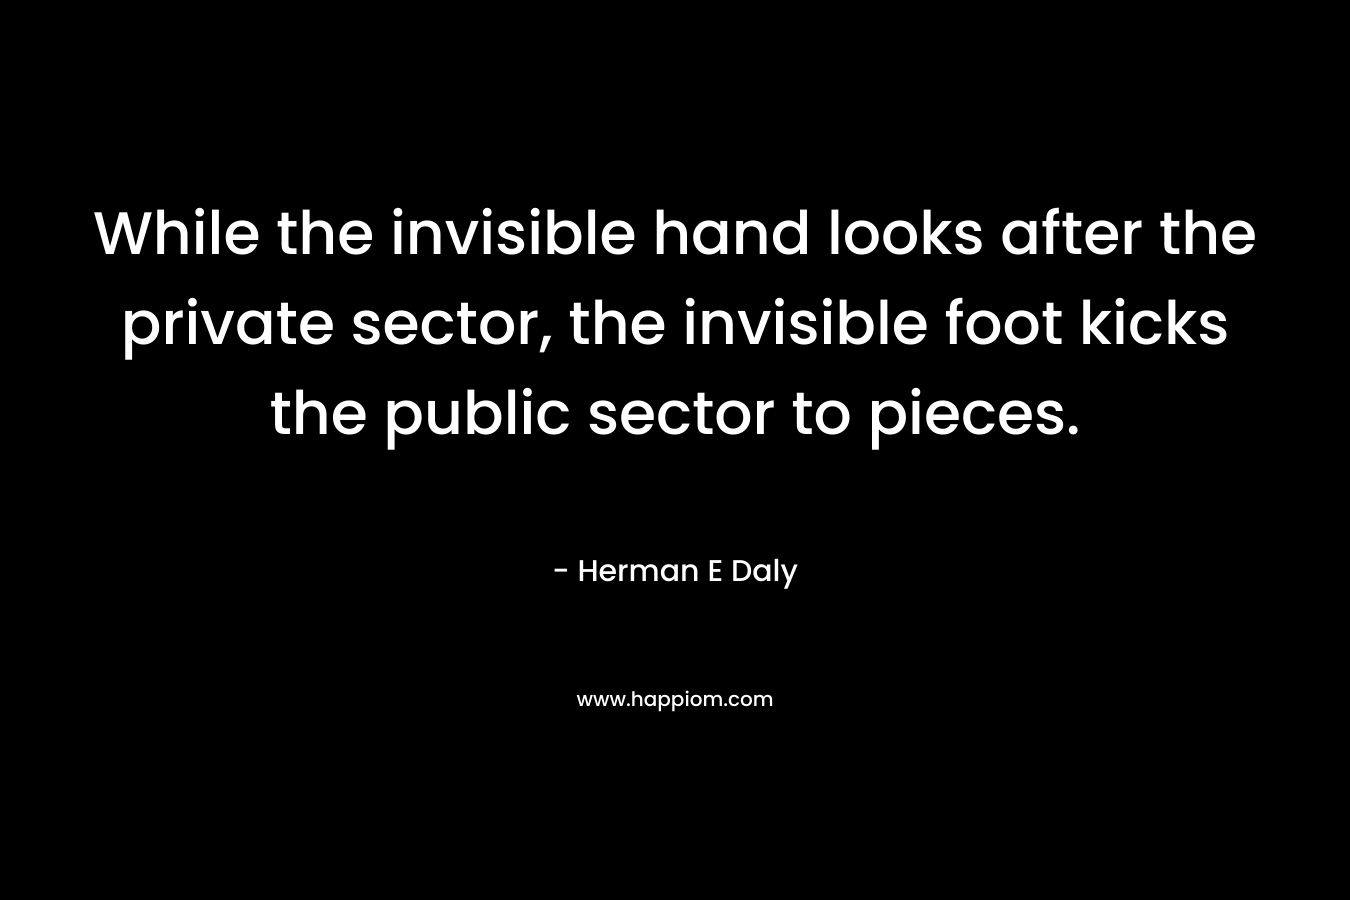 While the invisible hand looks after the private sector, the invisible foot kicks the public sector to pieces. – Herman E Daly